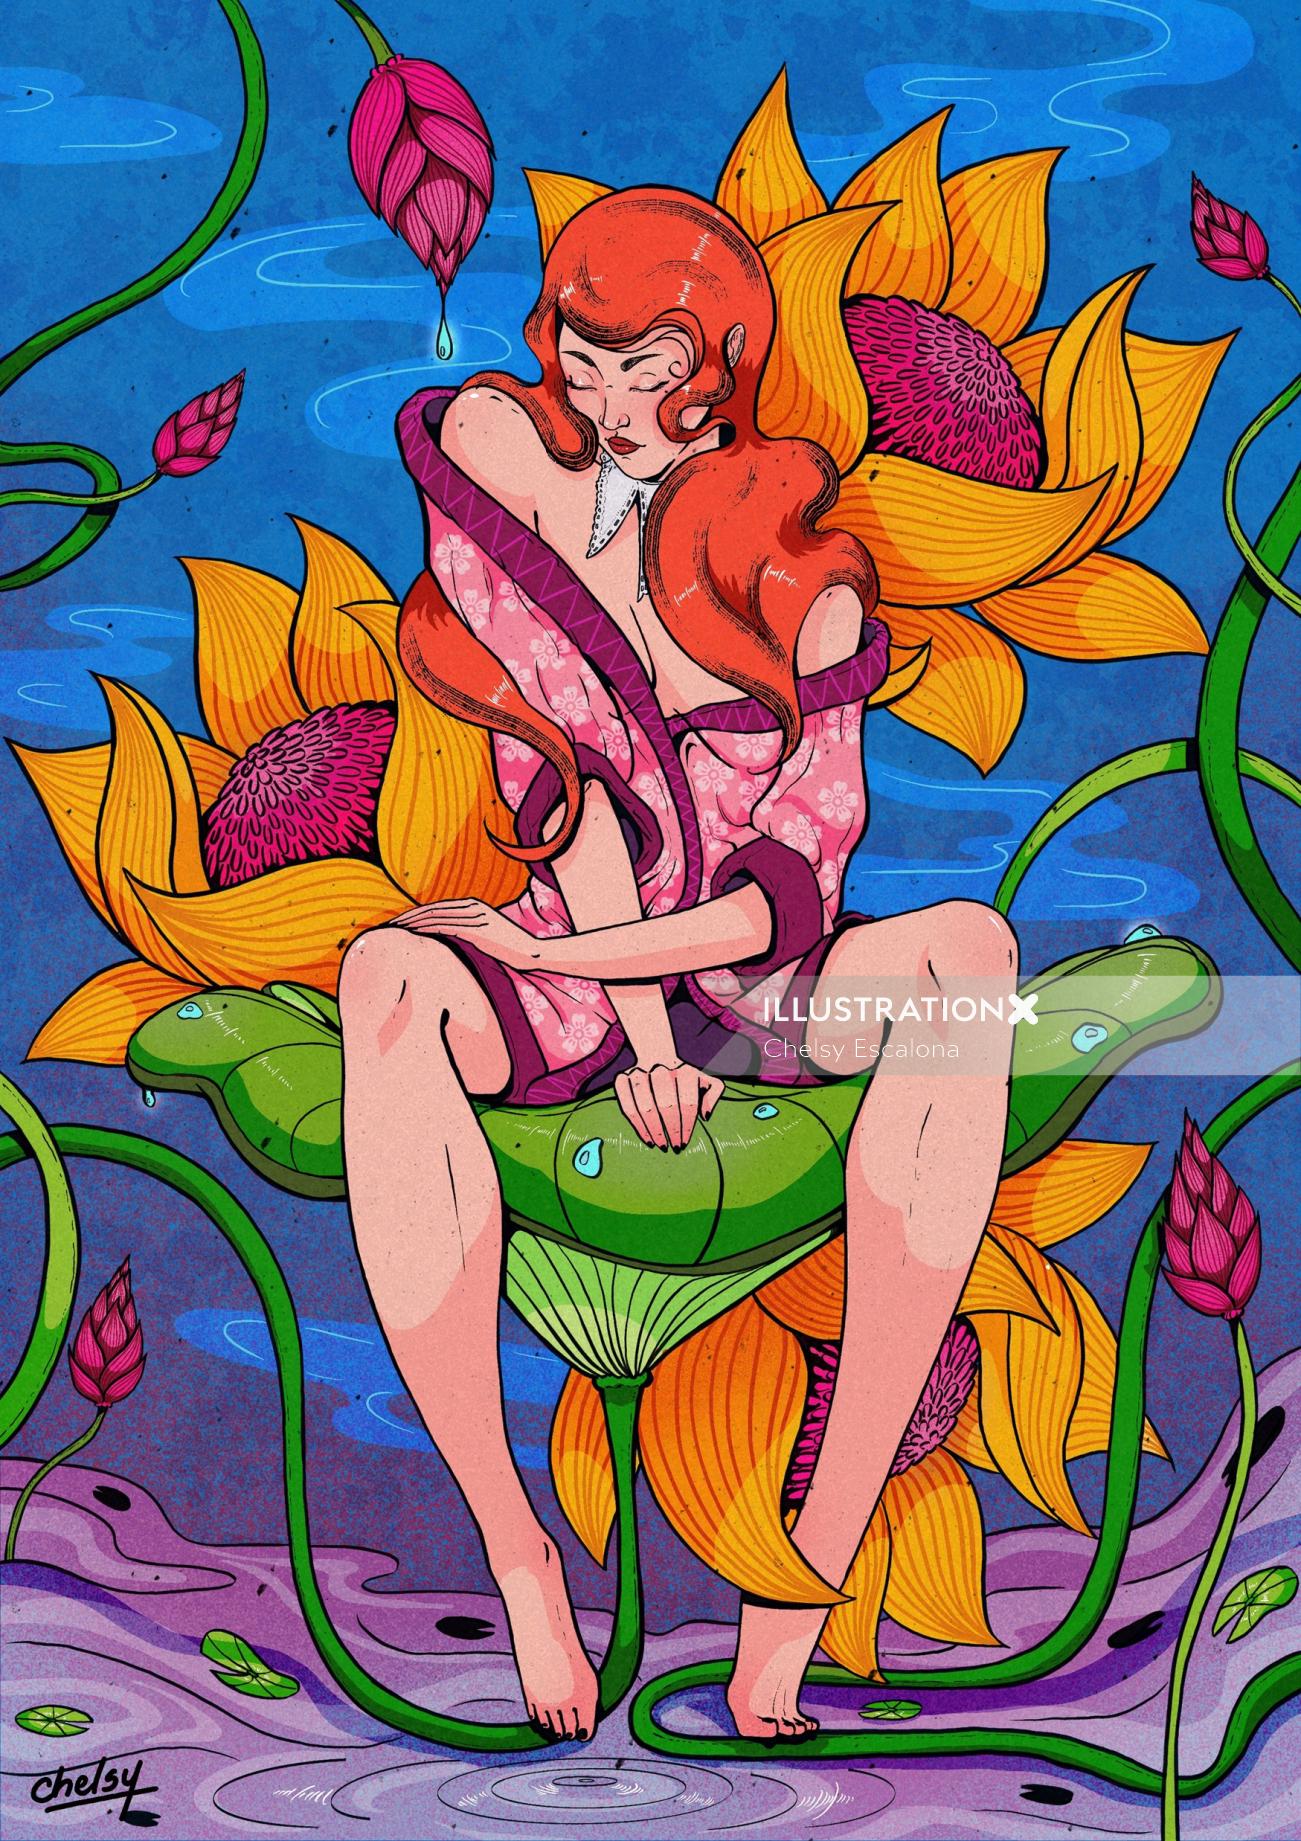 Illustration of erotic susceptibility as a concept